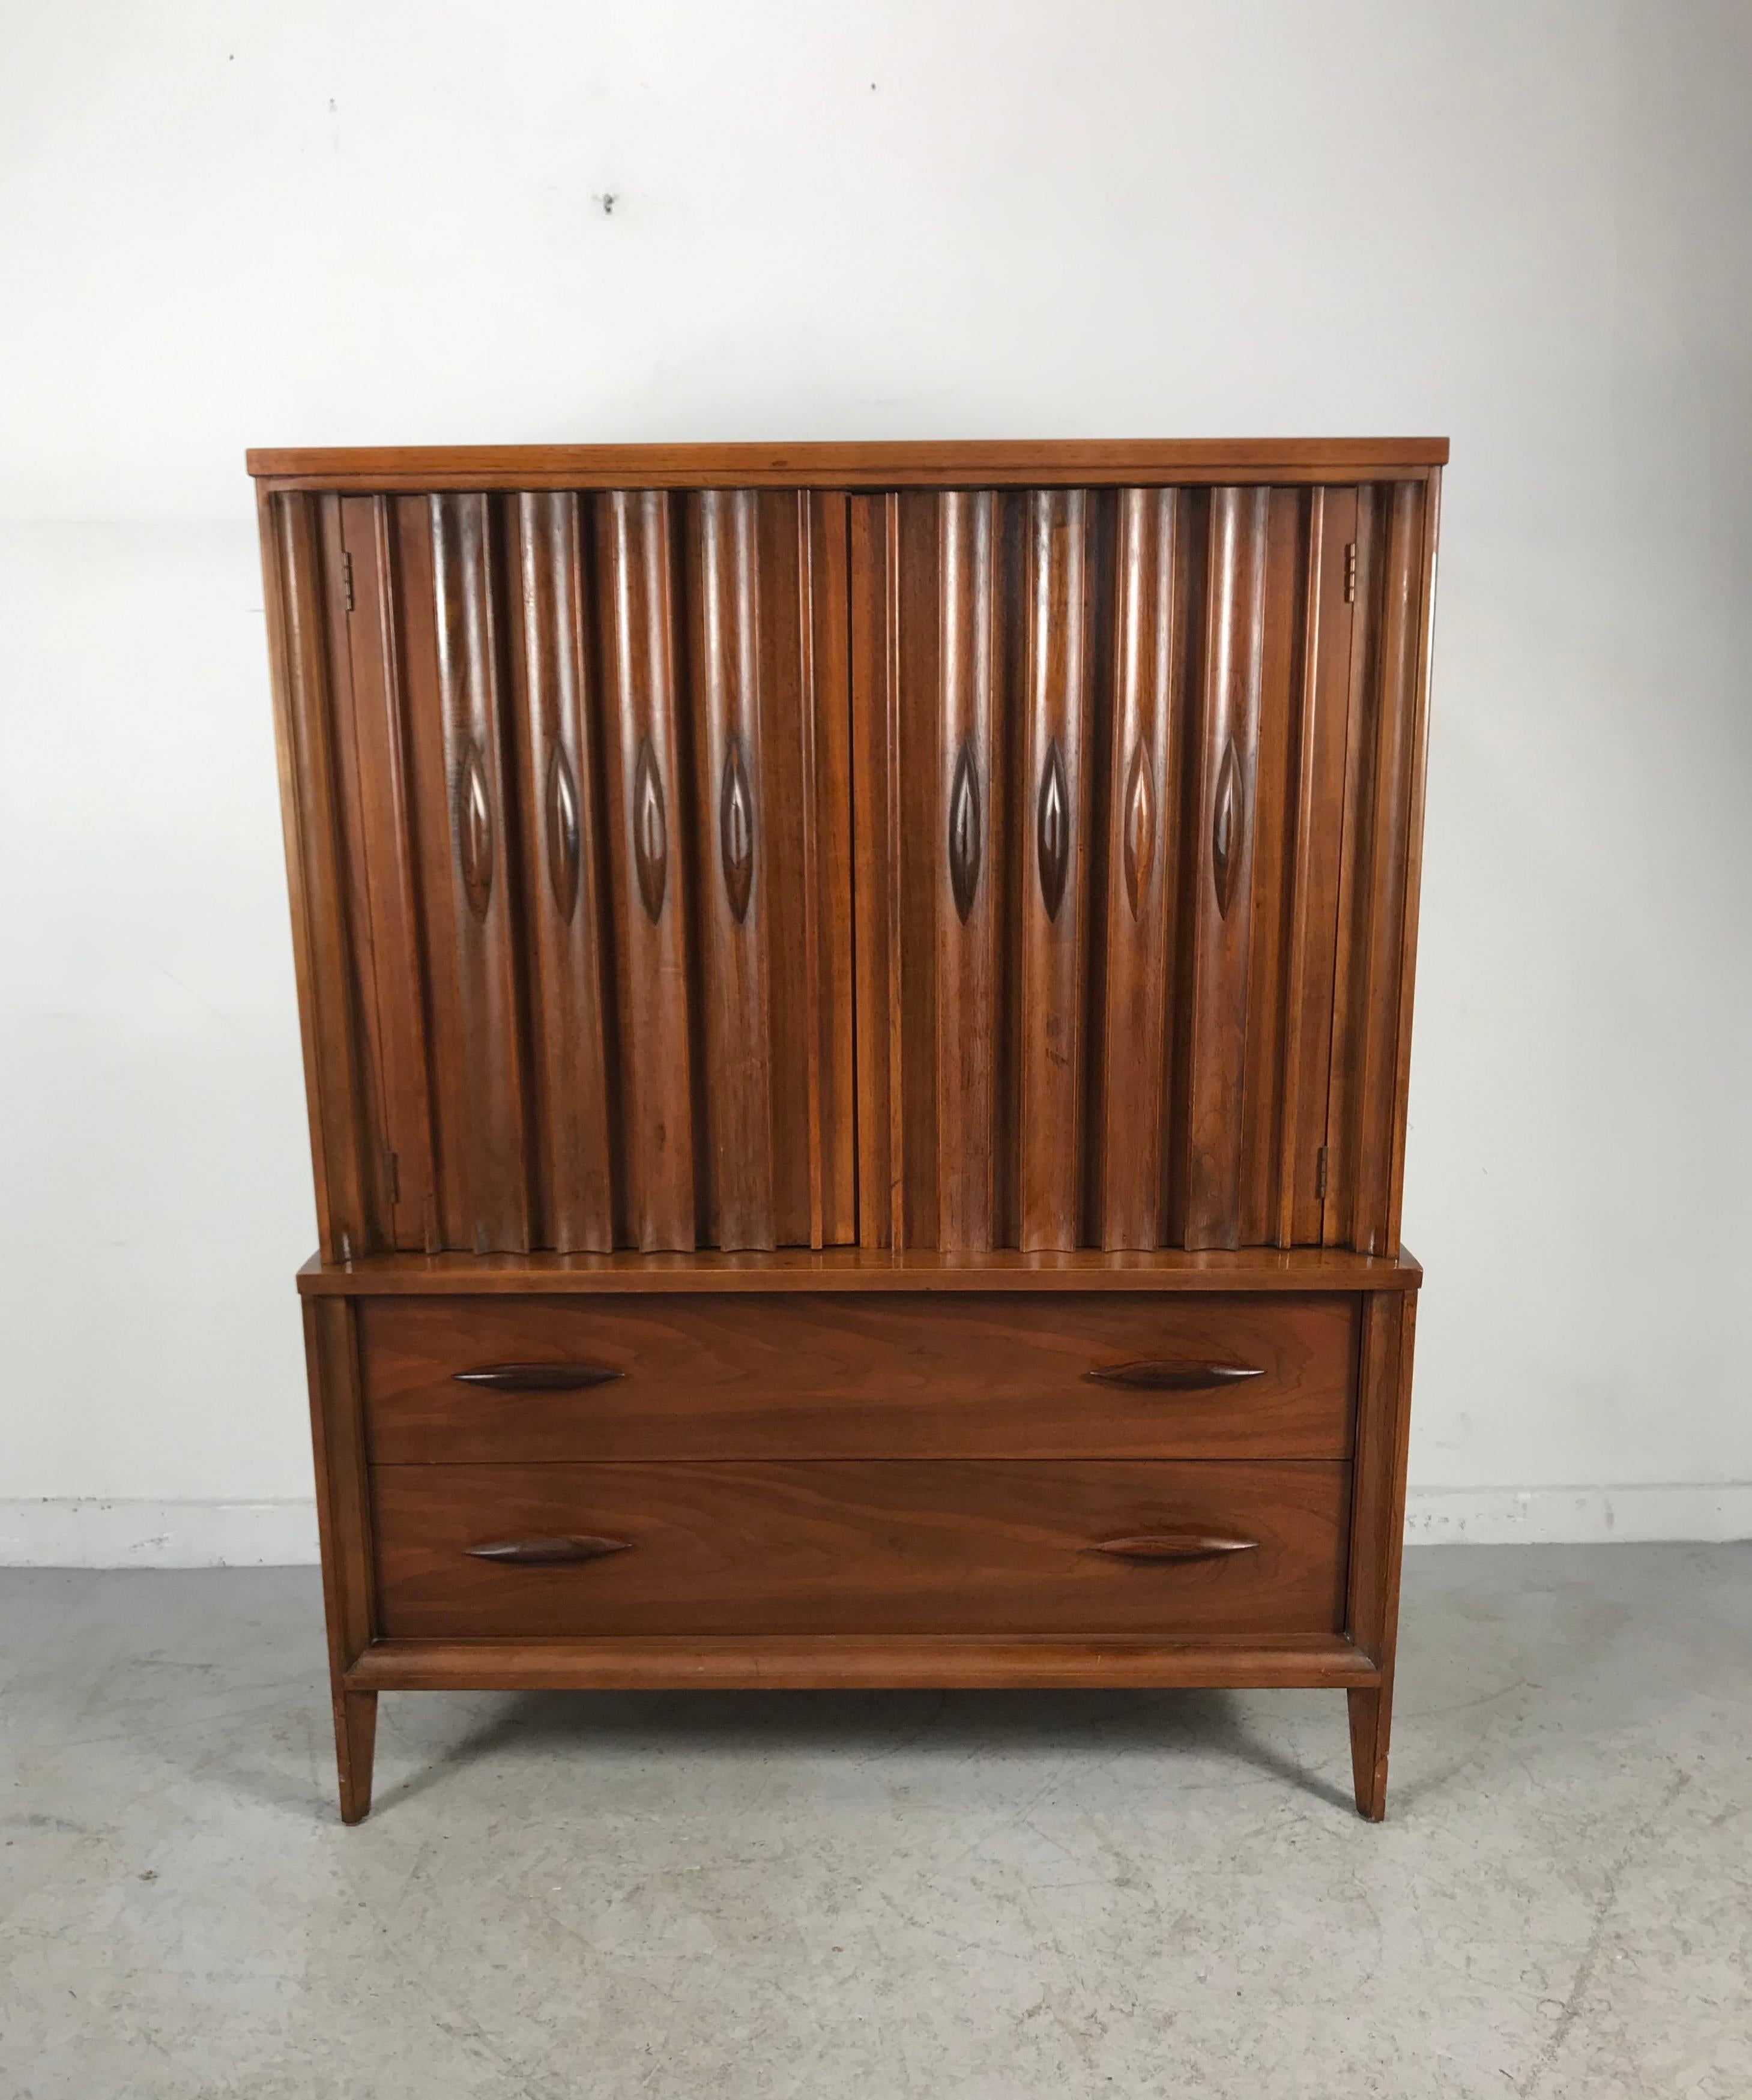 Classic Mid-Century Modern sculpted walnut and rosewood 6 drawer chest with doors. Manufactured by Vaughan Designs, superior quality and construction, dove-tail joinery, divided drawers, jewelry compartments, stunning figured wood graining, sculpted